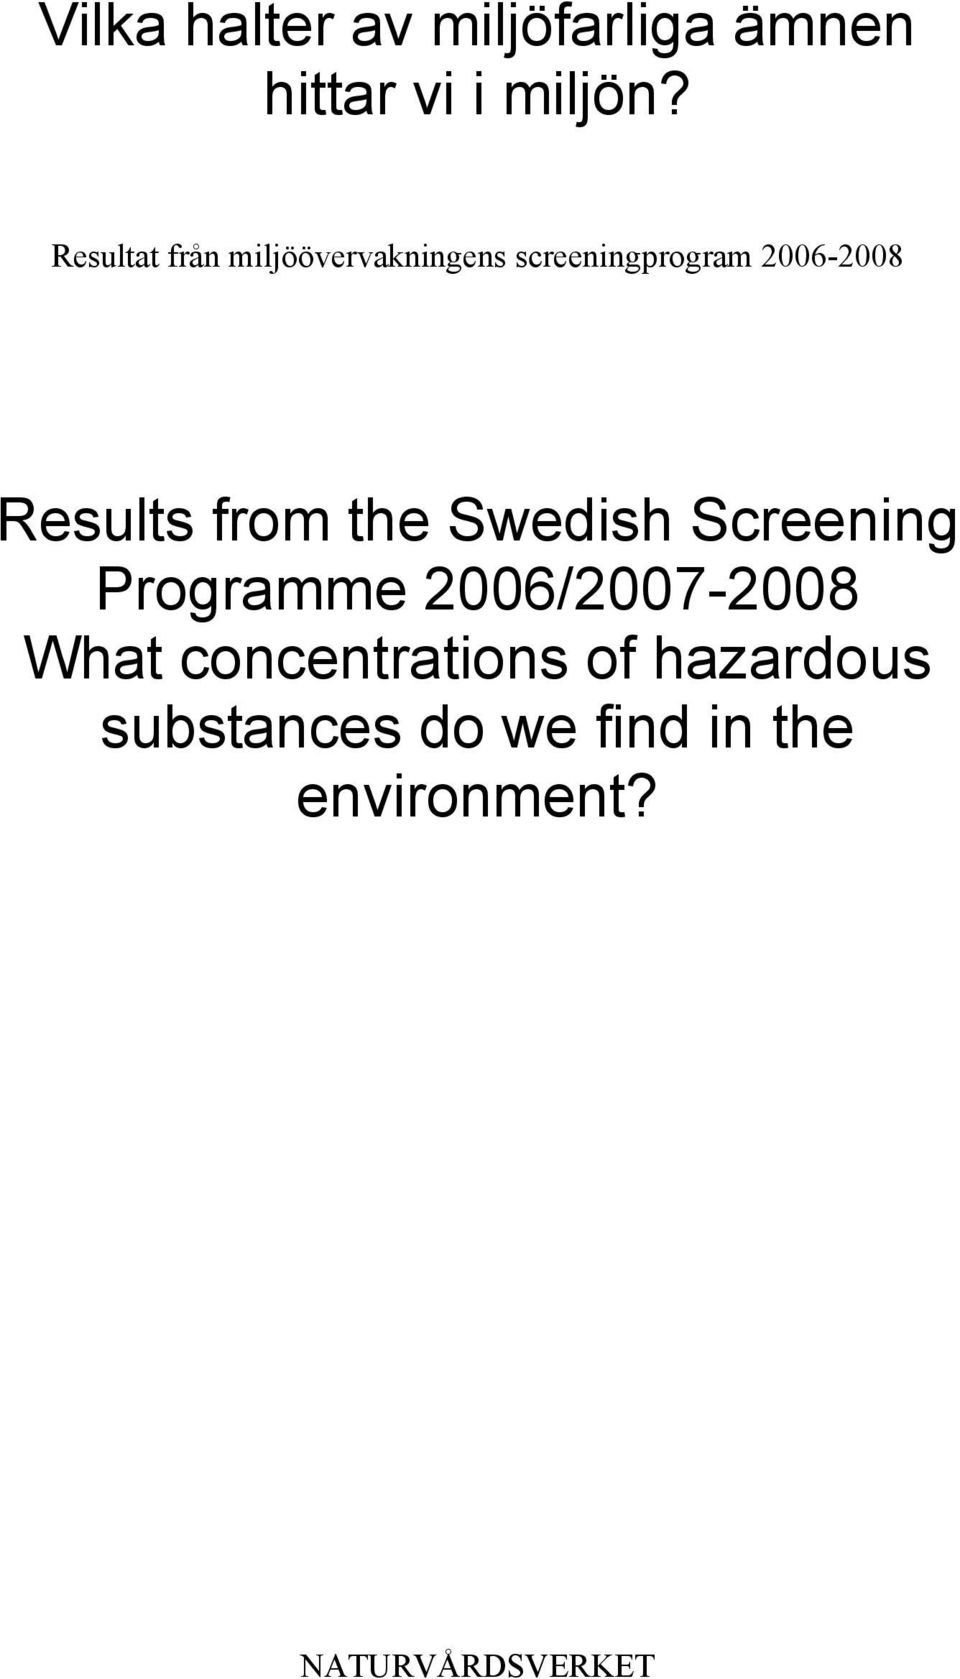 Results from the Swedish Screening Programme 2006/2007-2008 What